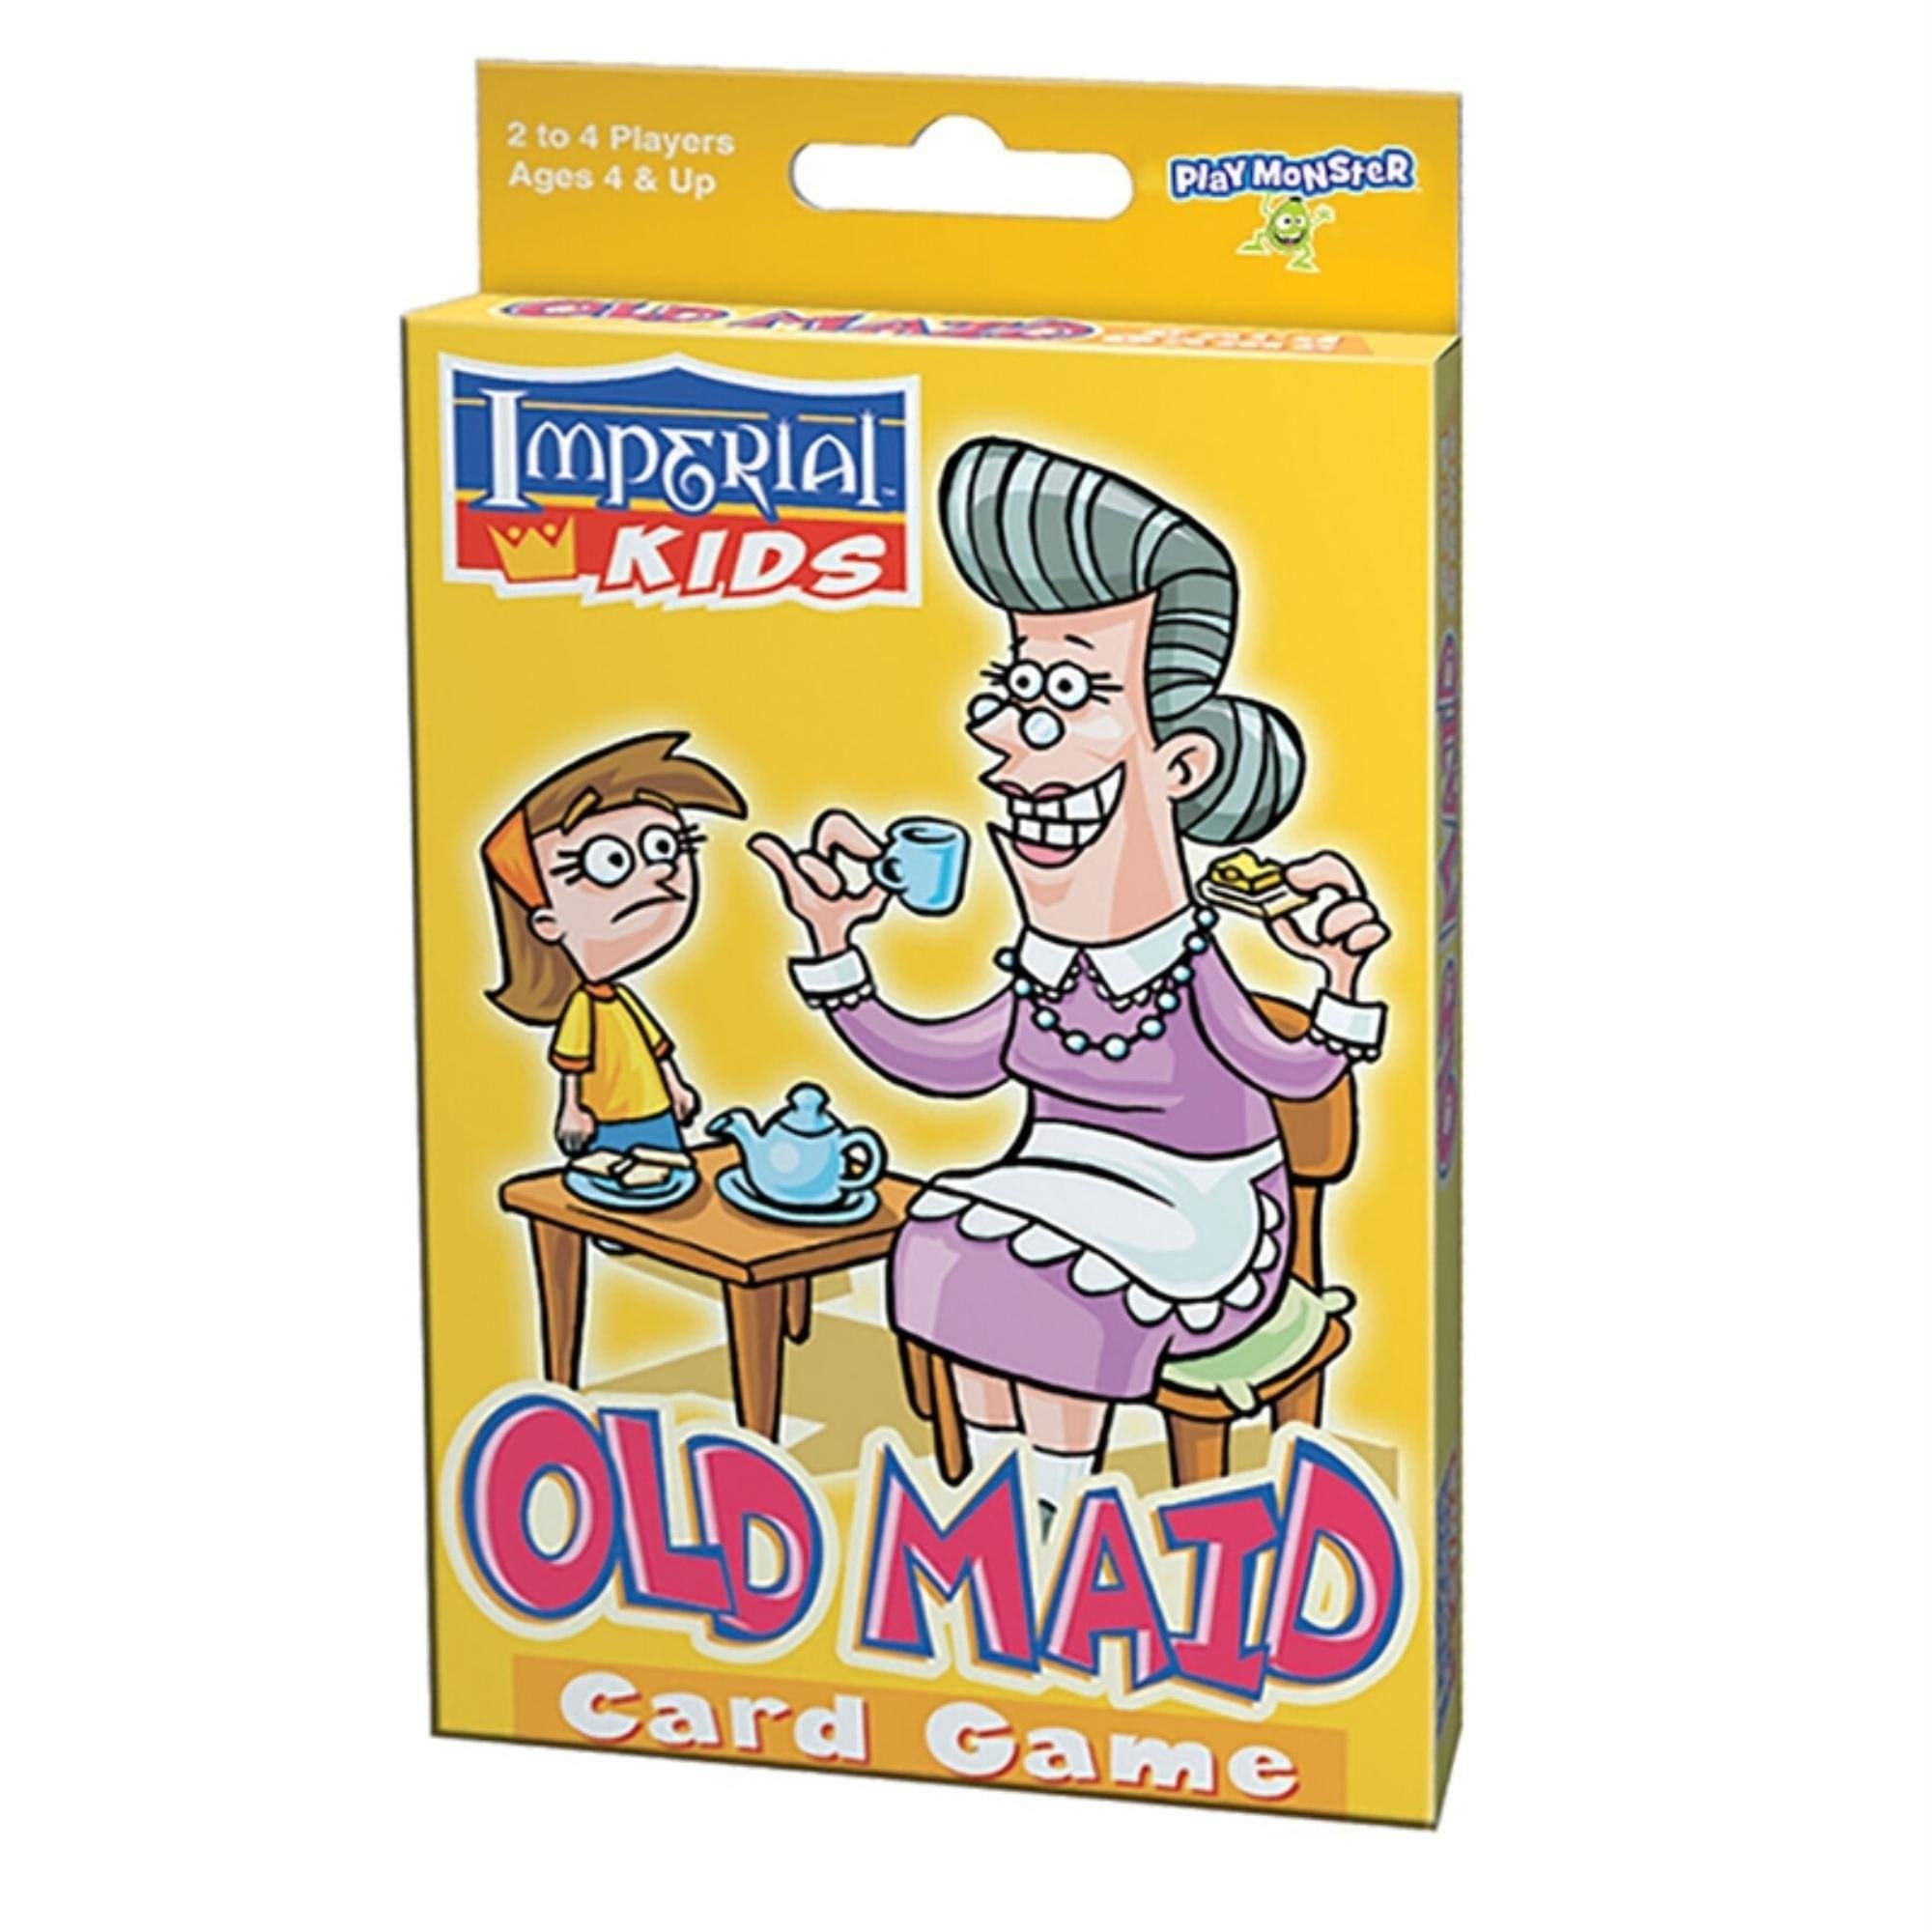 Patch Products Old Maid Card Game